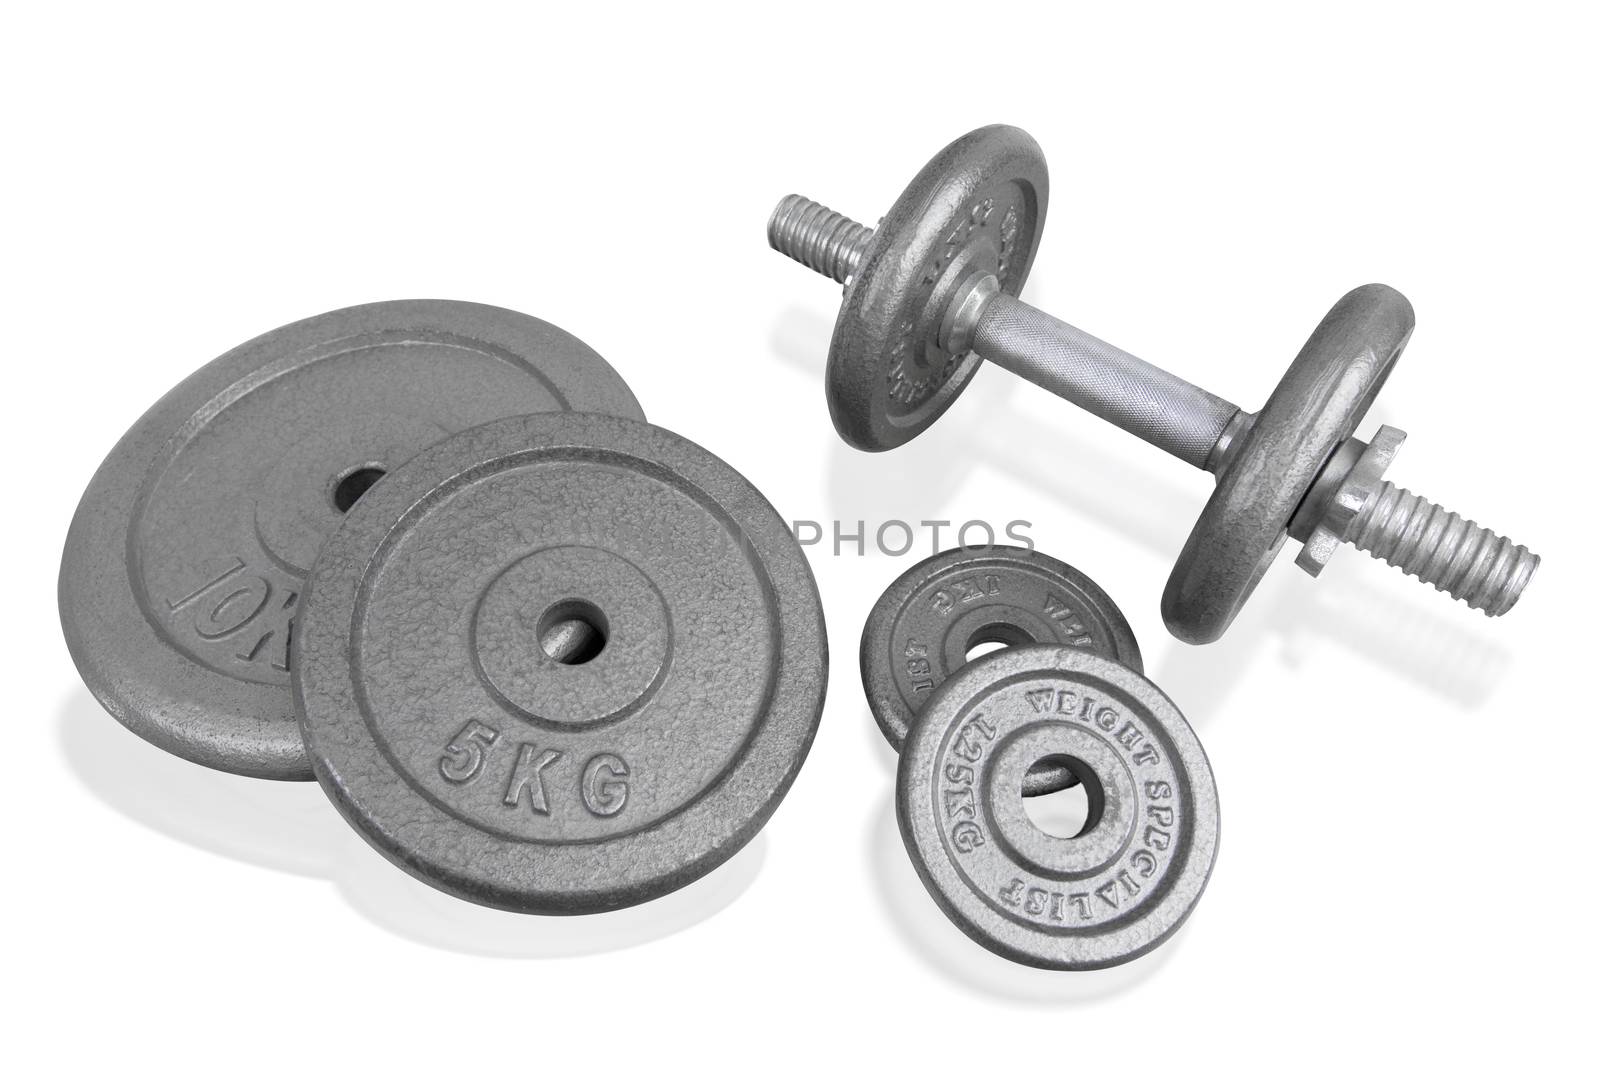 Fitness exercise equipment silver dumbbell and weights plate isolated on white background.